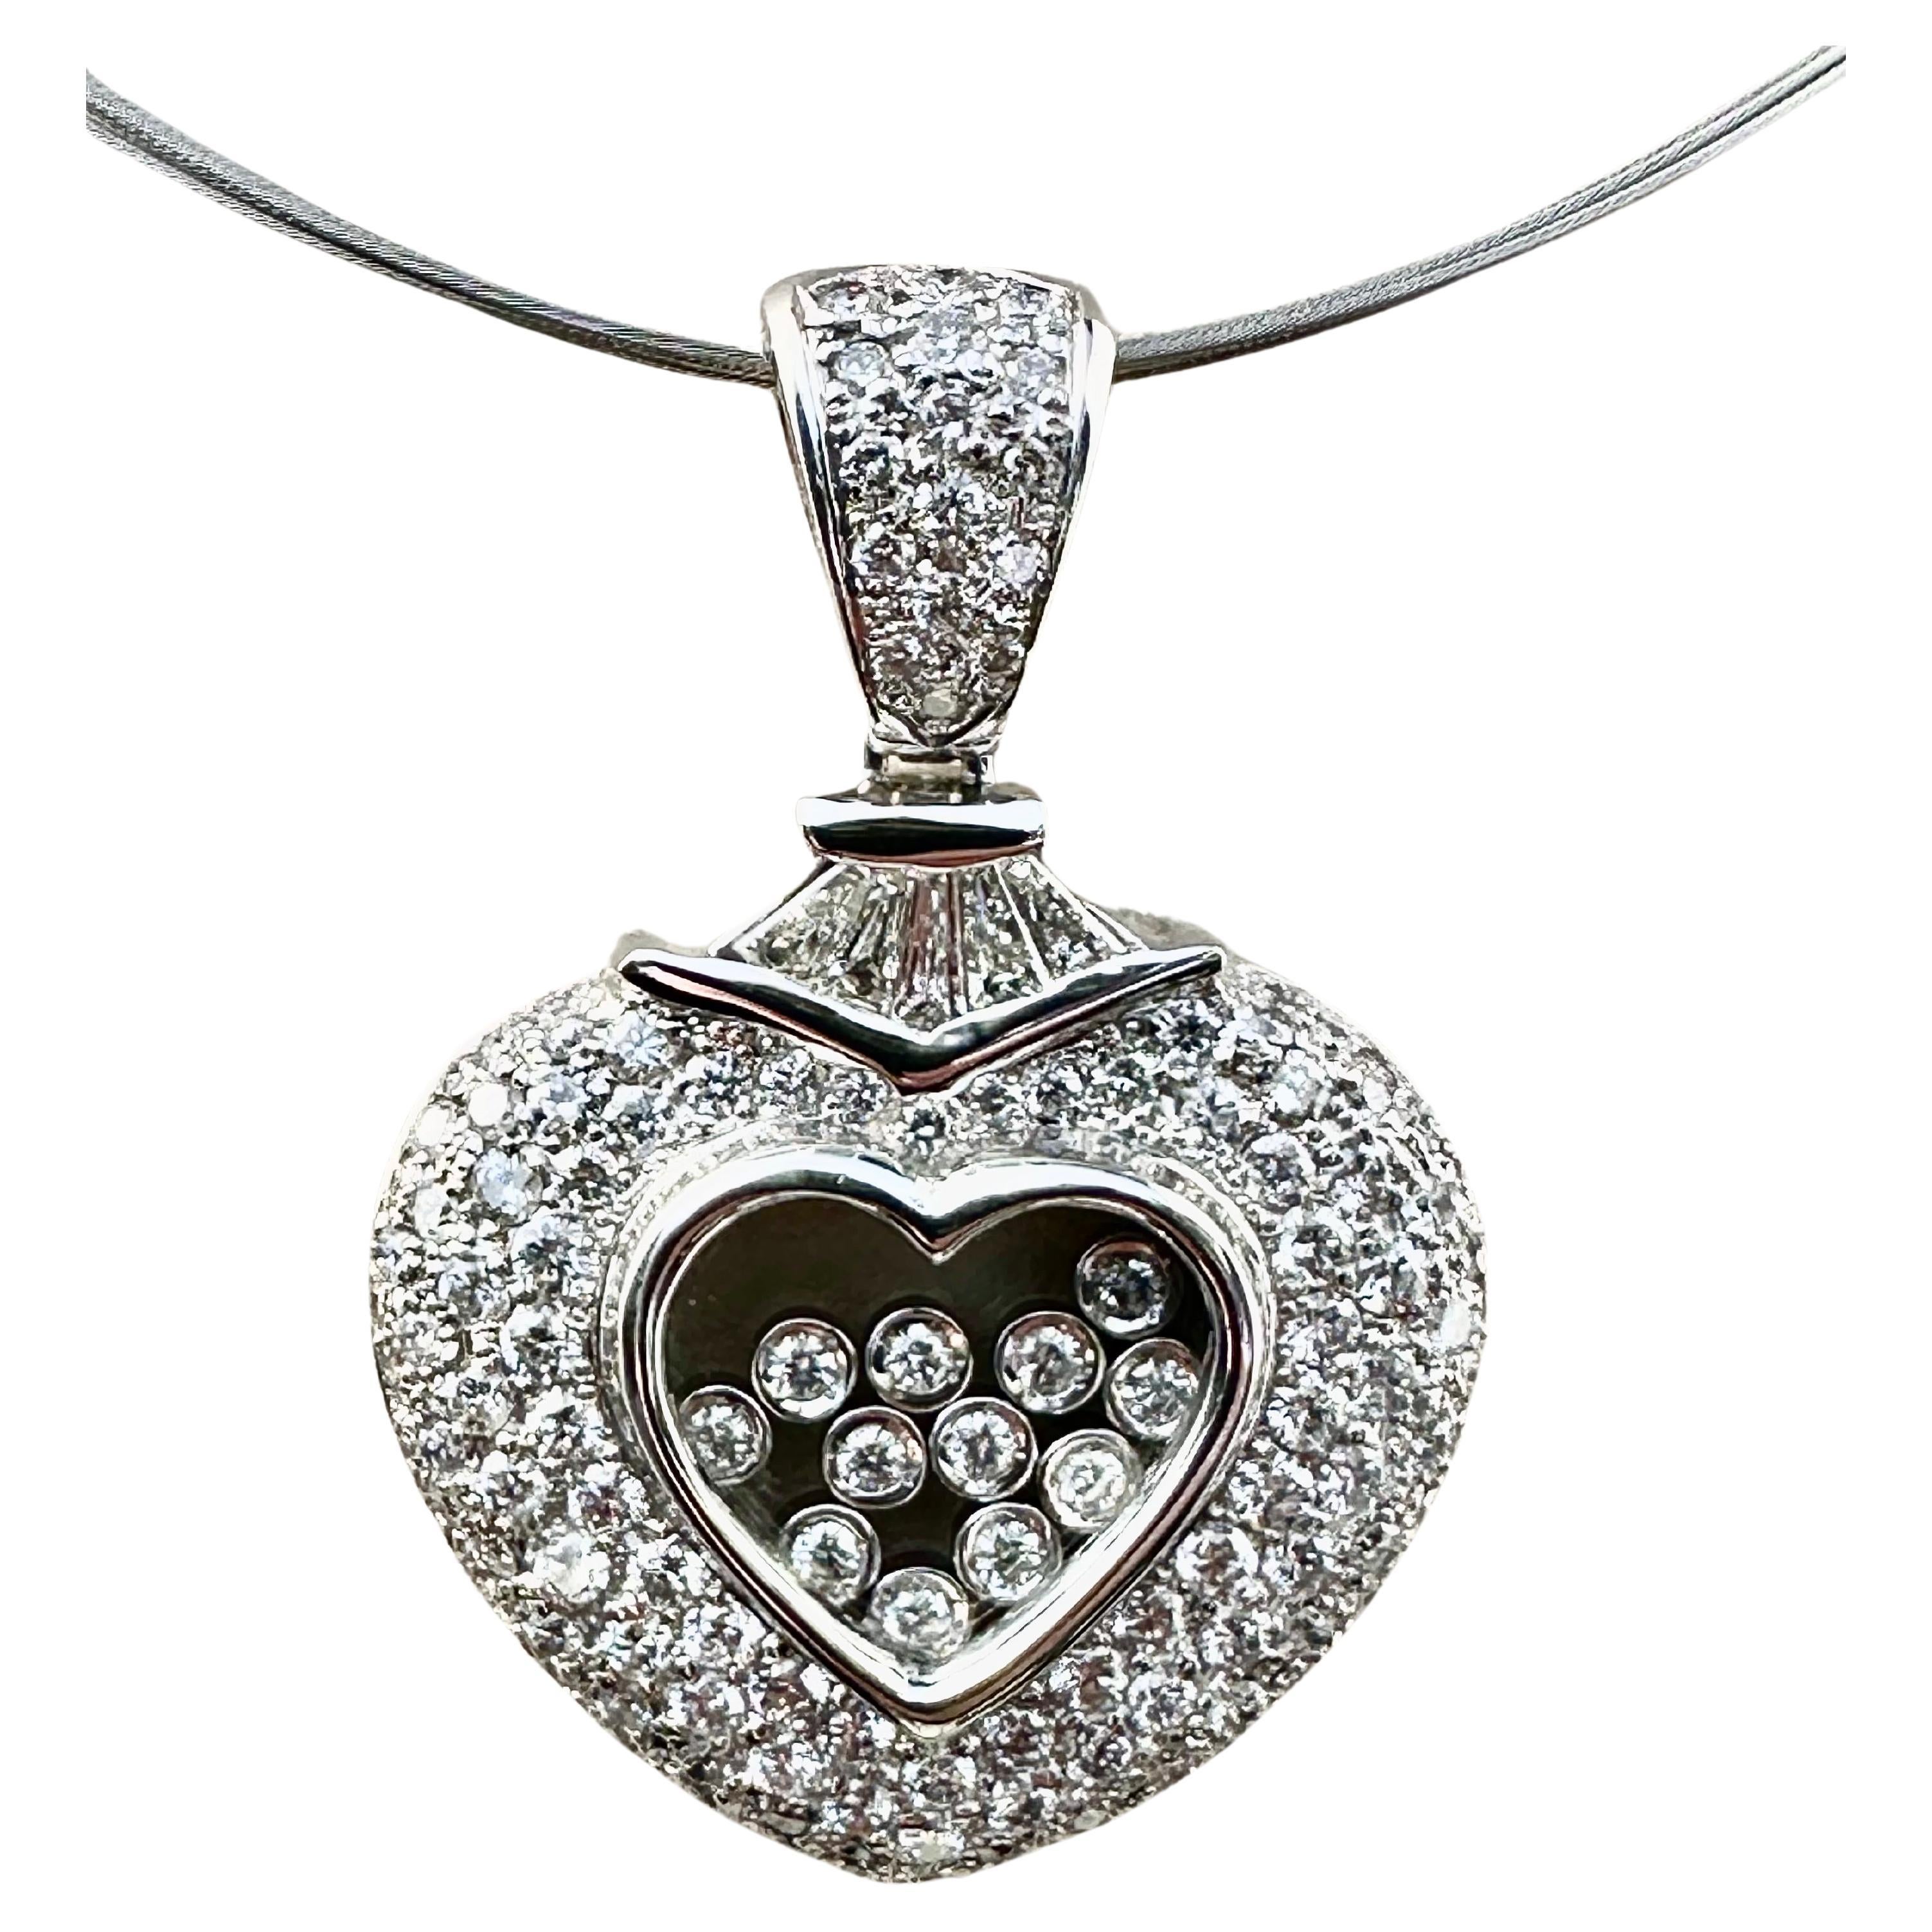  White Gold Diamond Heart Necklace with Floating Diamonds 18K White Gold For Sale